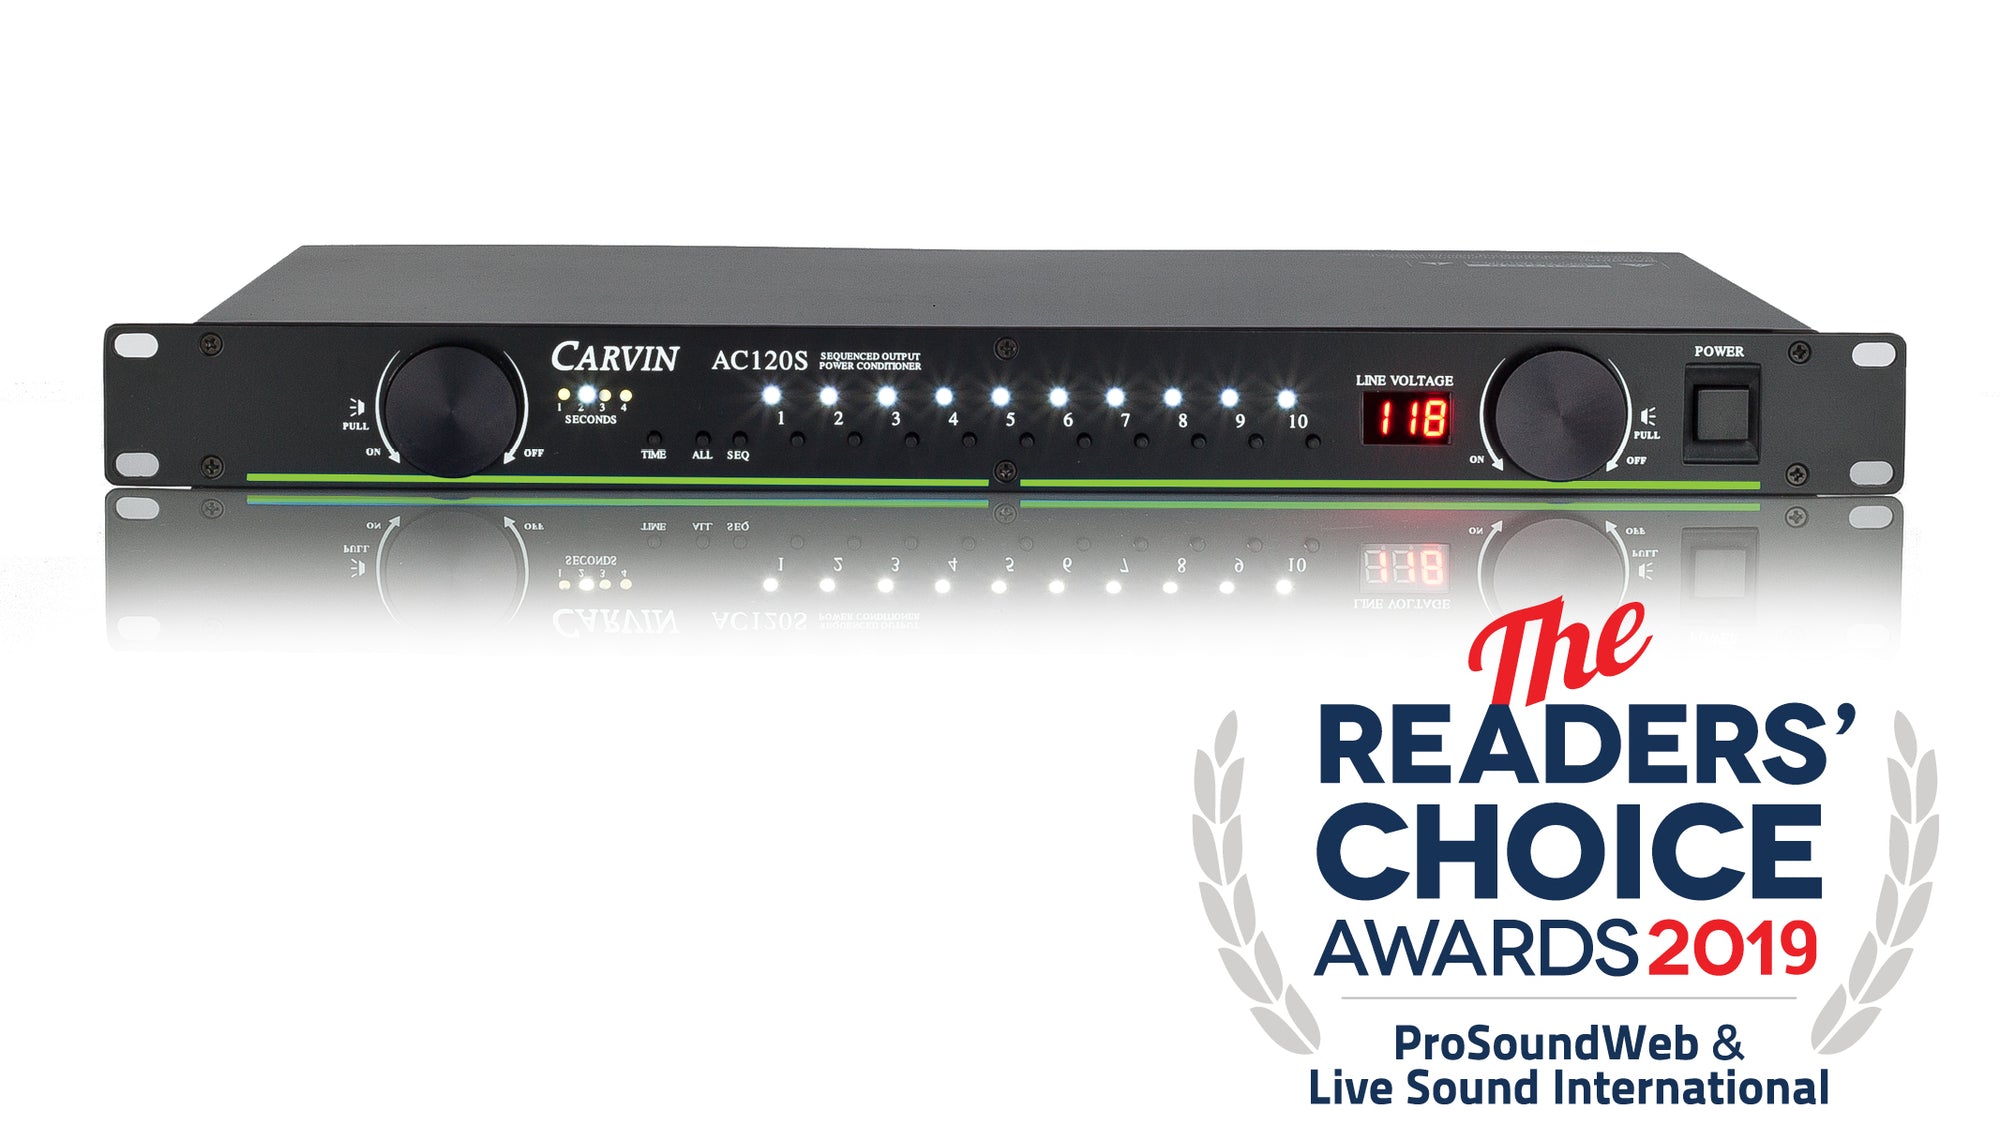 carvin ac120s power conditioner wins the 2019 reader's choice award from prosoundweb and live sound international